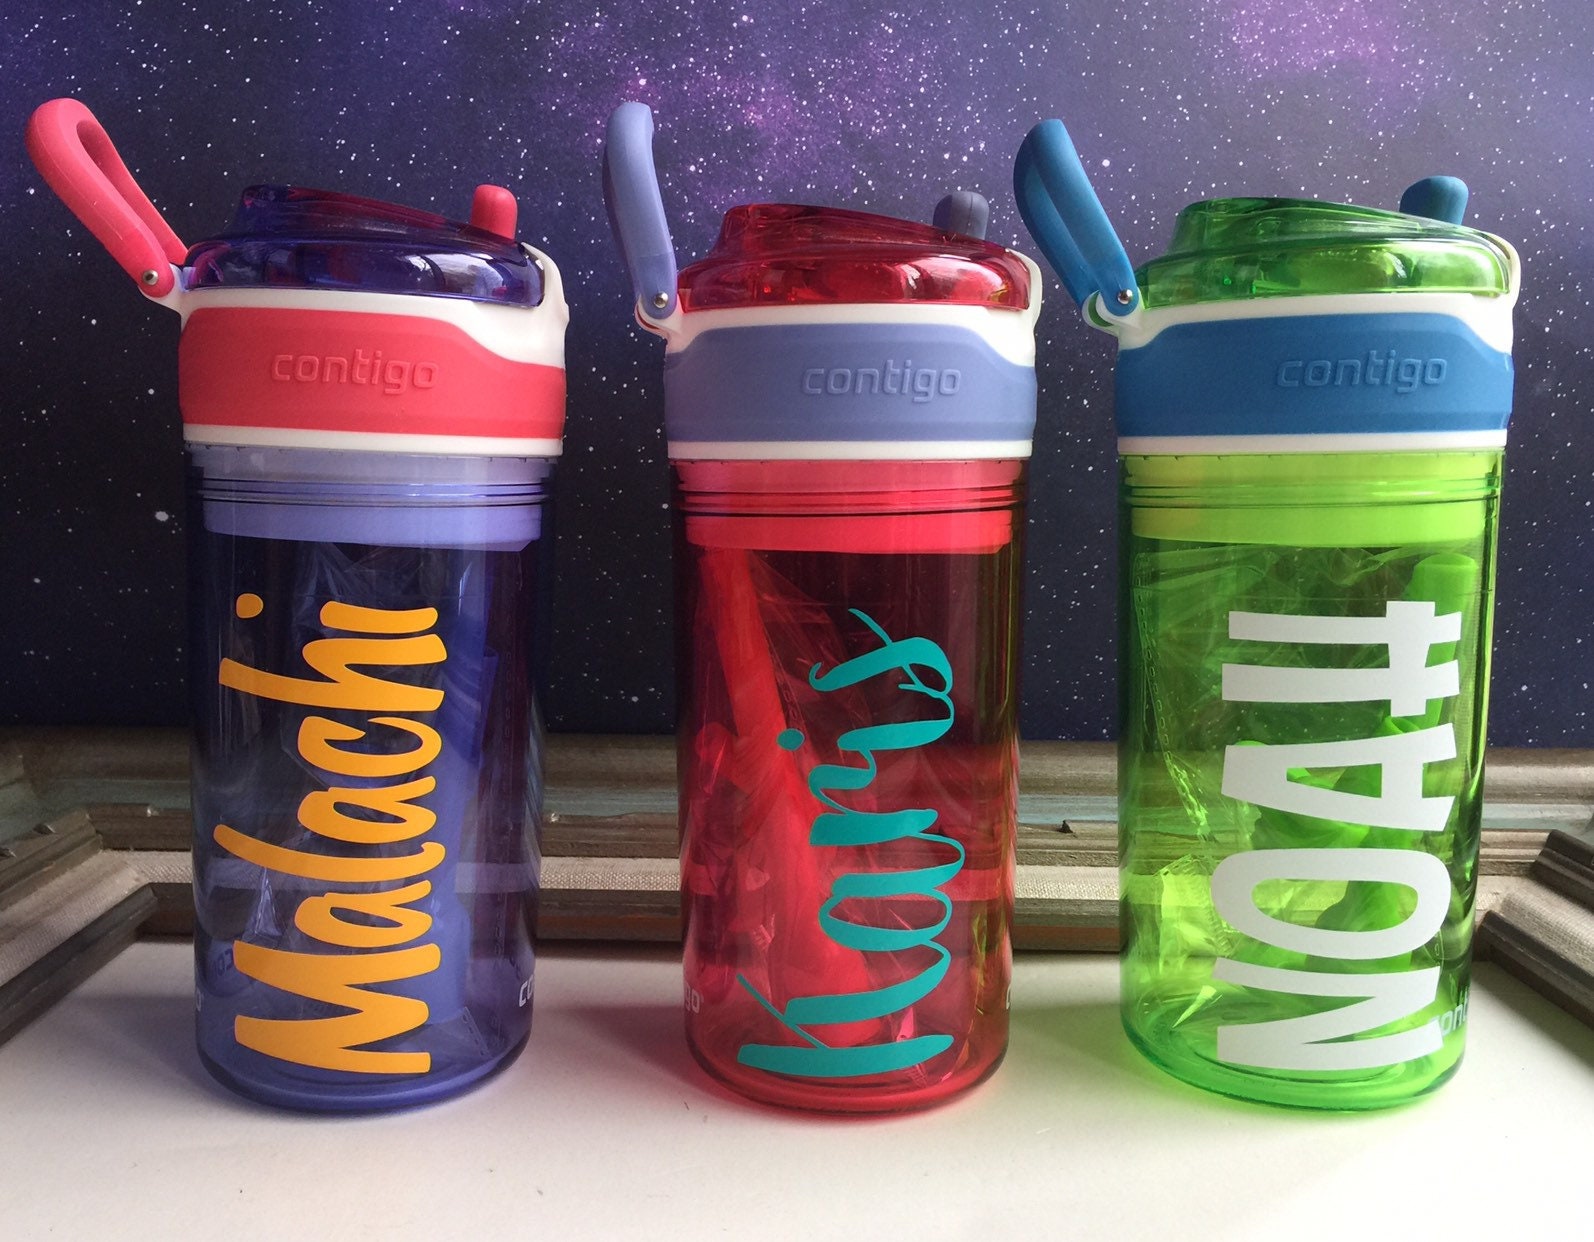 Kid's Water Bottle, Clear Water Bottles With Removable Snack Compartment,  Custom Water Bottle for Kids, Back to School Water Bottle 